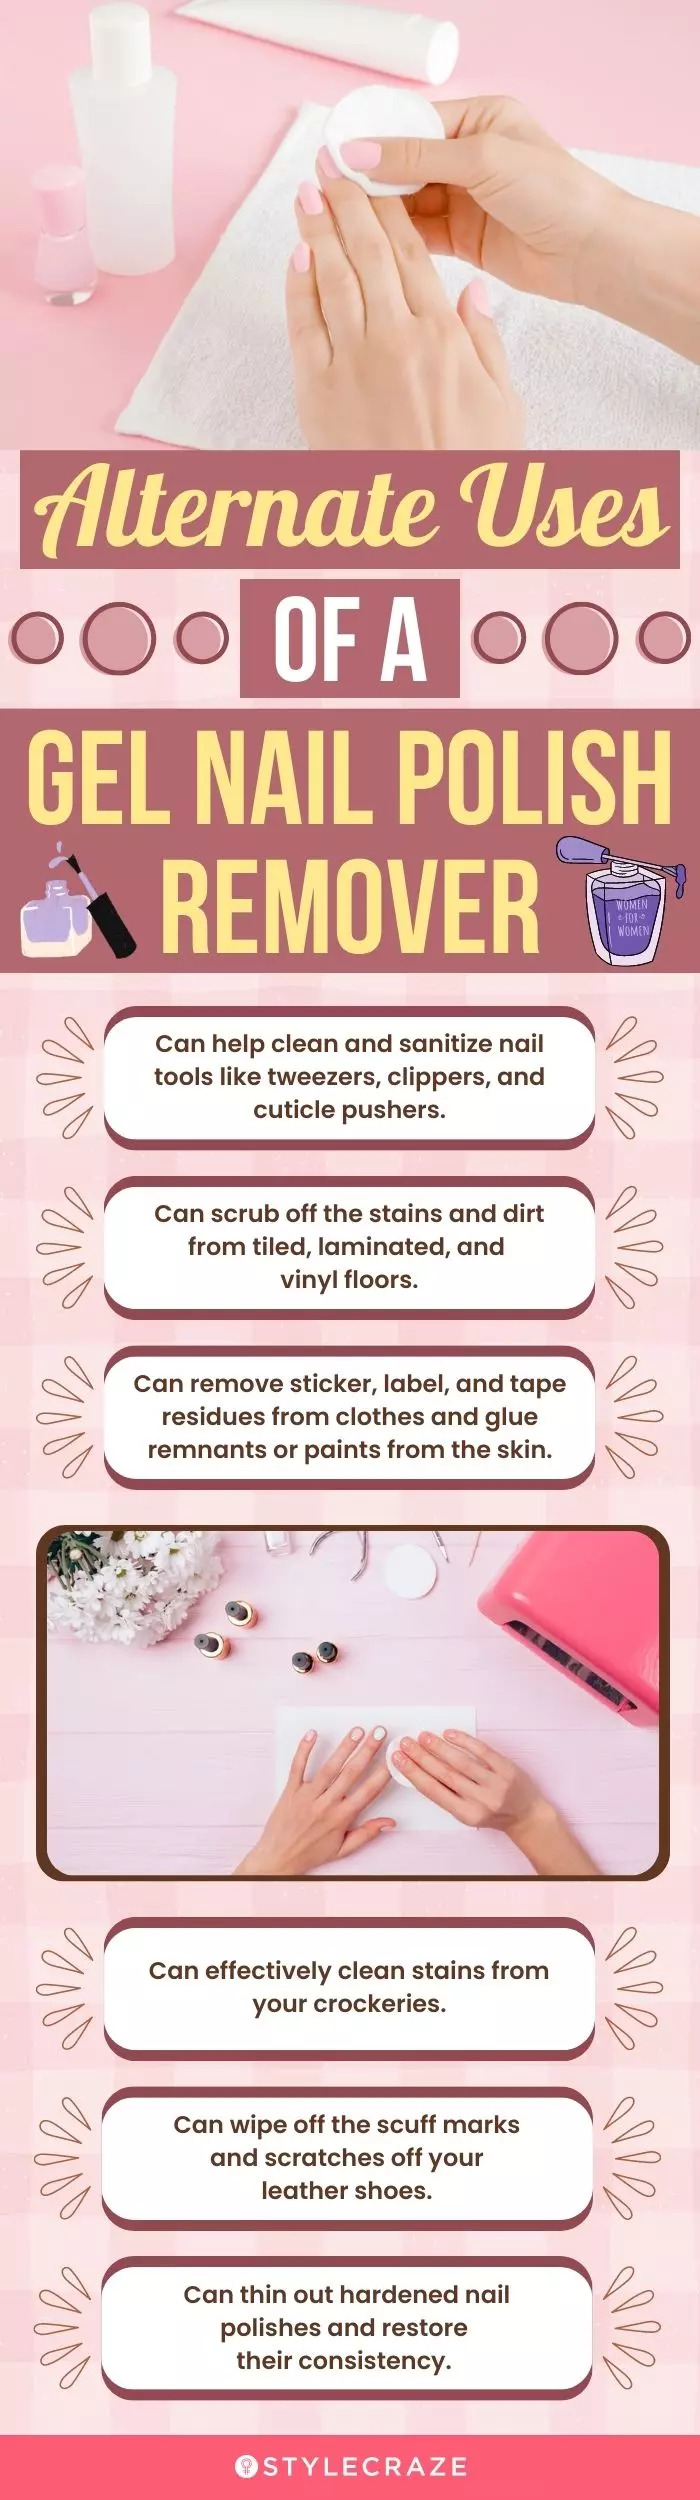 Alternate Uses Of A Gel Nail Polish Remover (infographic)